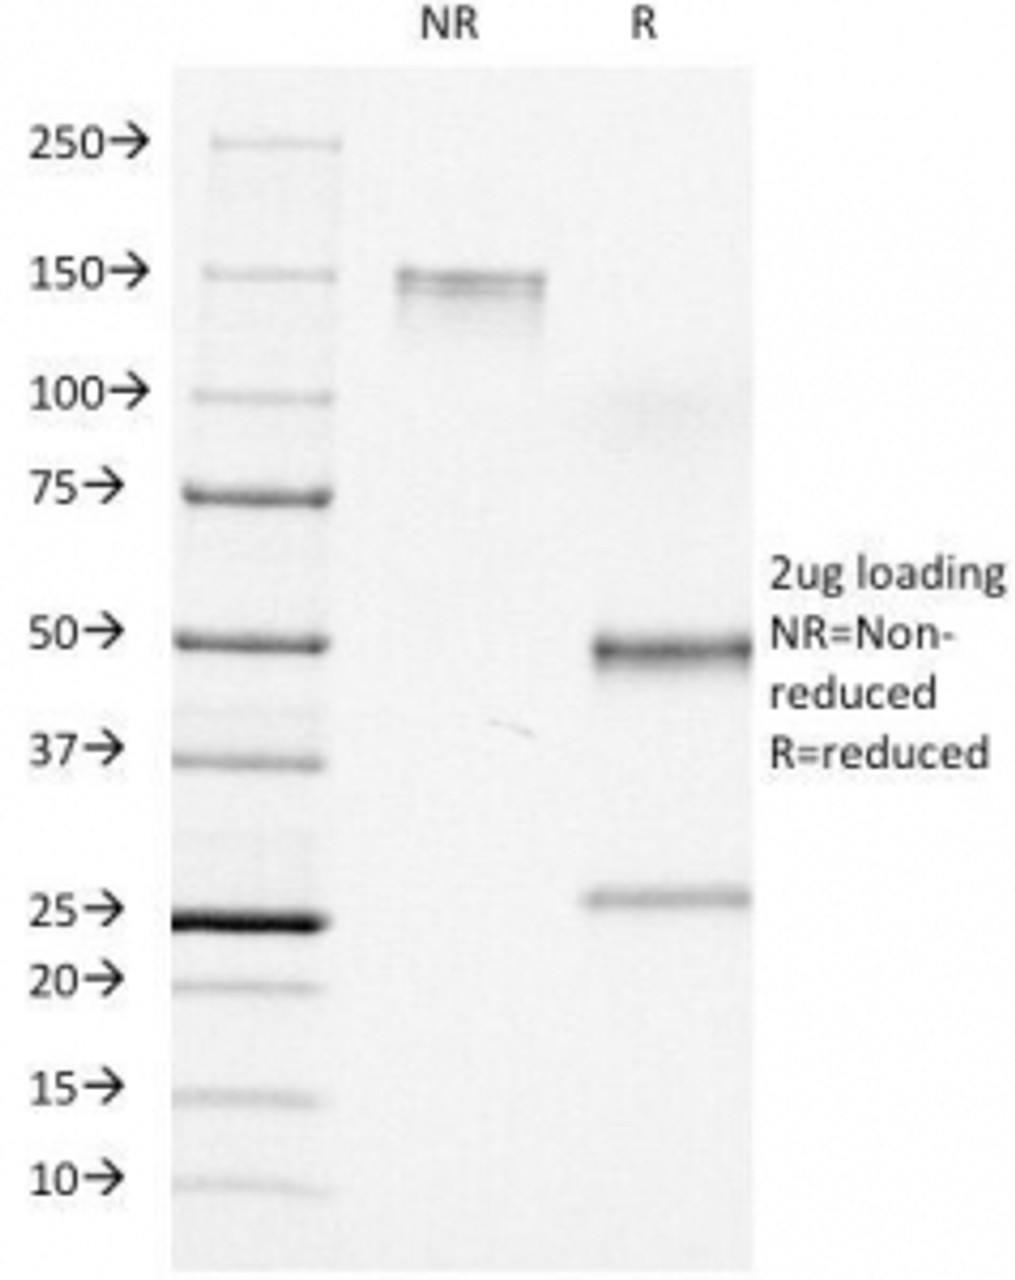 SDS-PAGE Analysis of Purified, BSA-Free CD7 Antibody (clone C7/511) . Confirmation of Integrity and Purity of the Antibody.